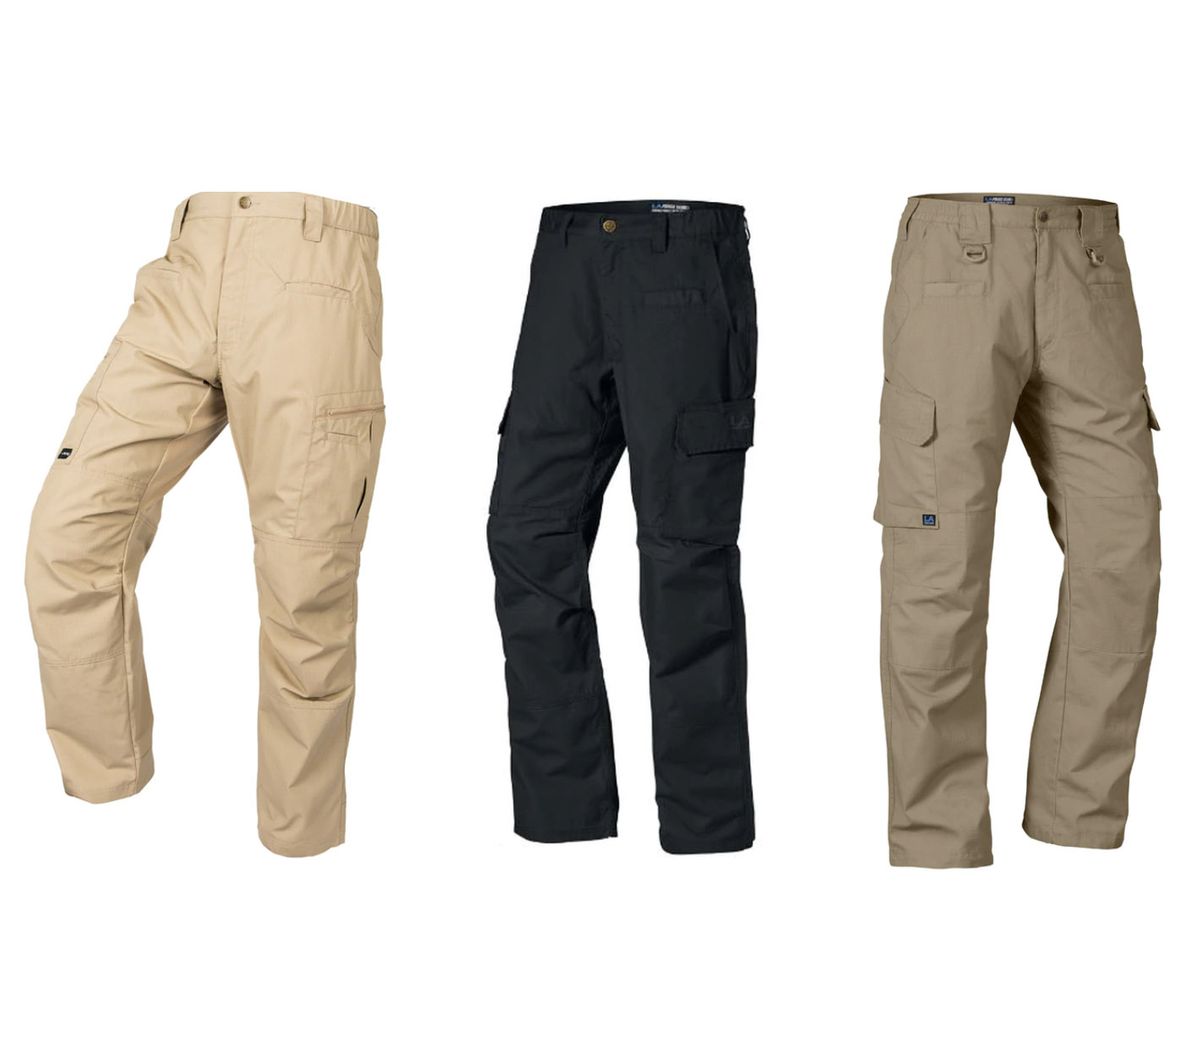 Police Patrol  Security Trousers  Niton999